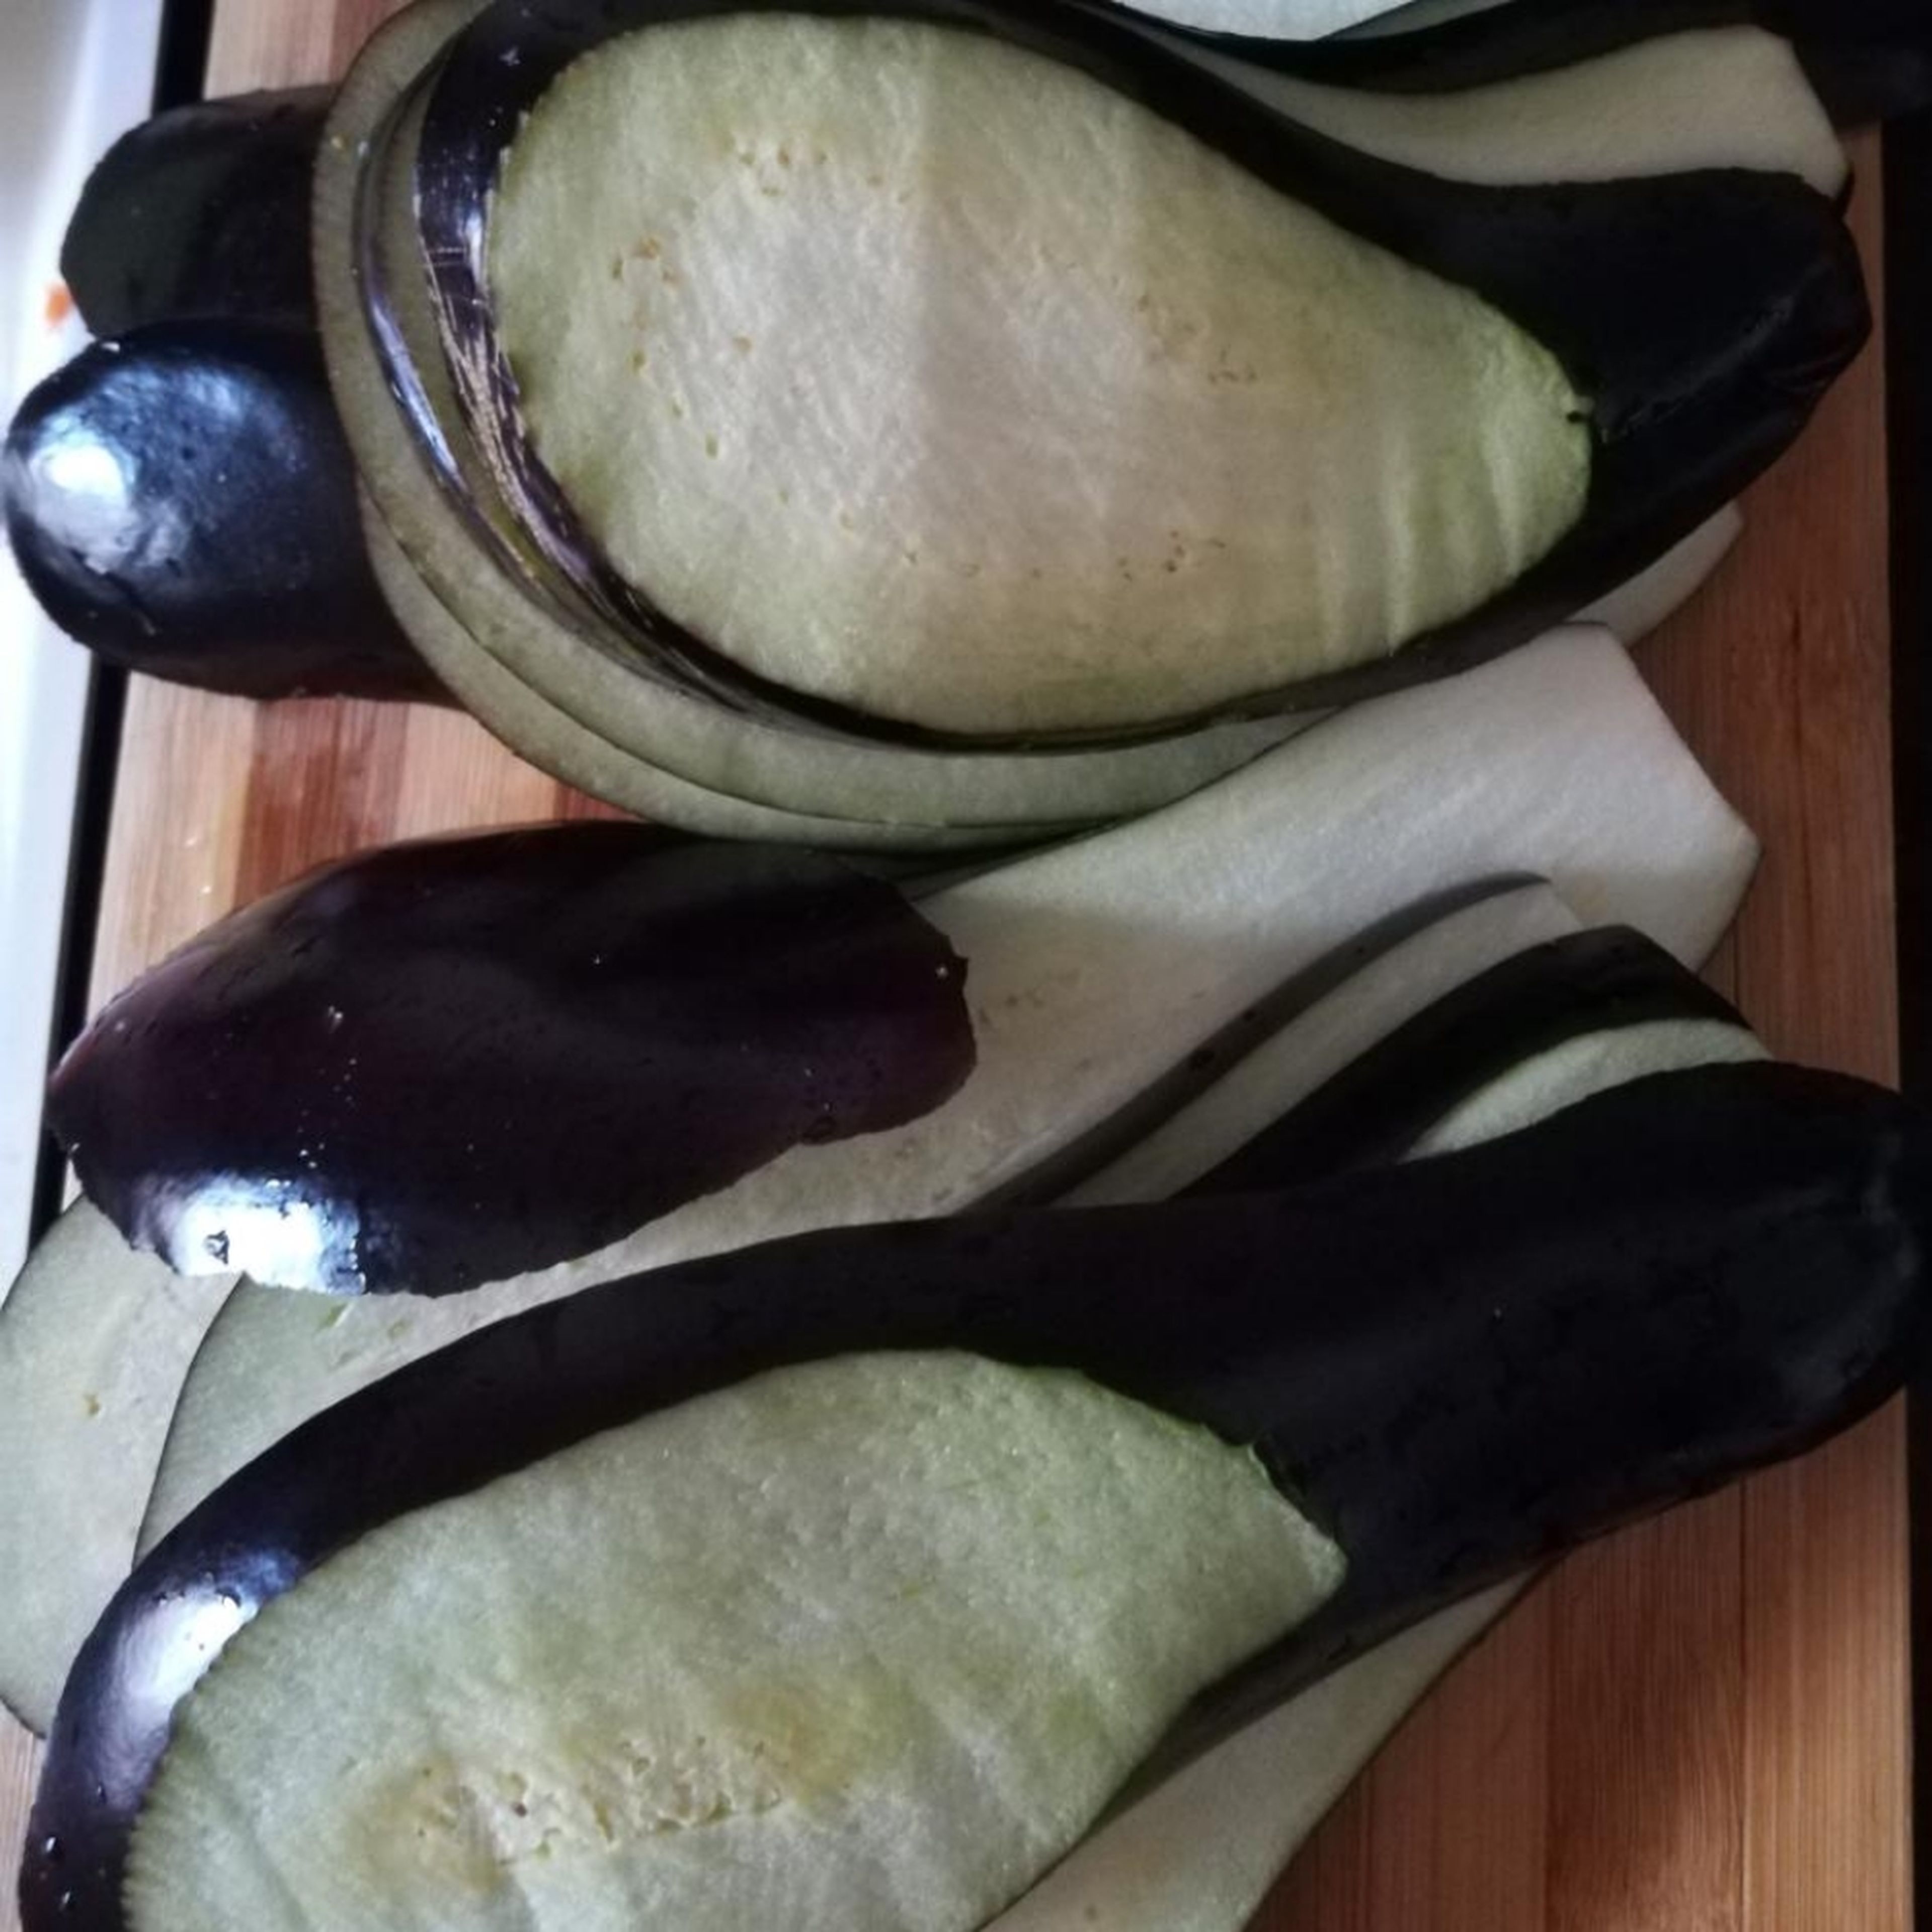 cut the eggplants in to slices